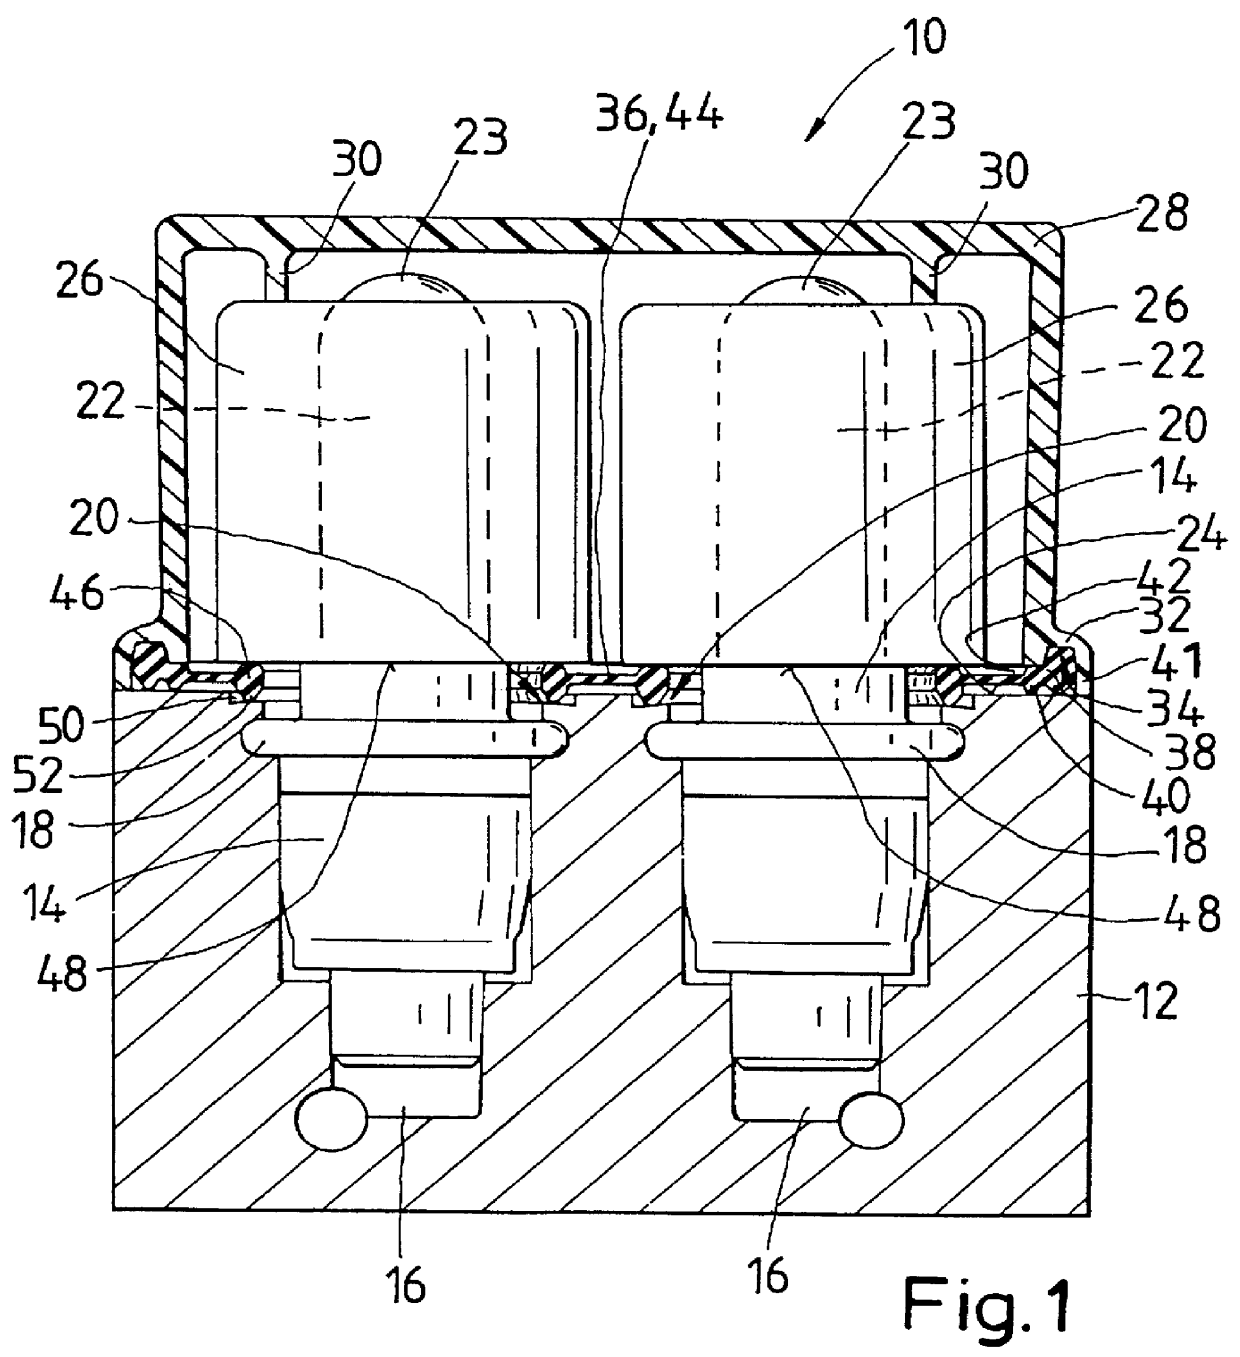 Hydraulic unit for a vehicle brake system